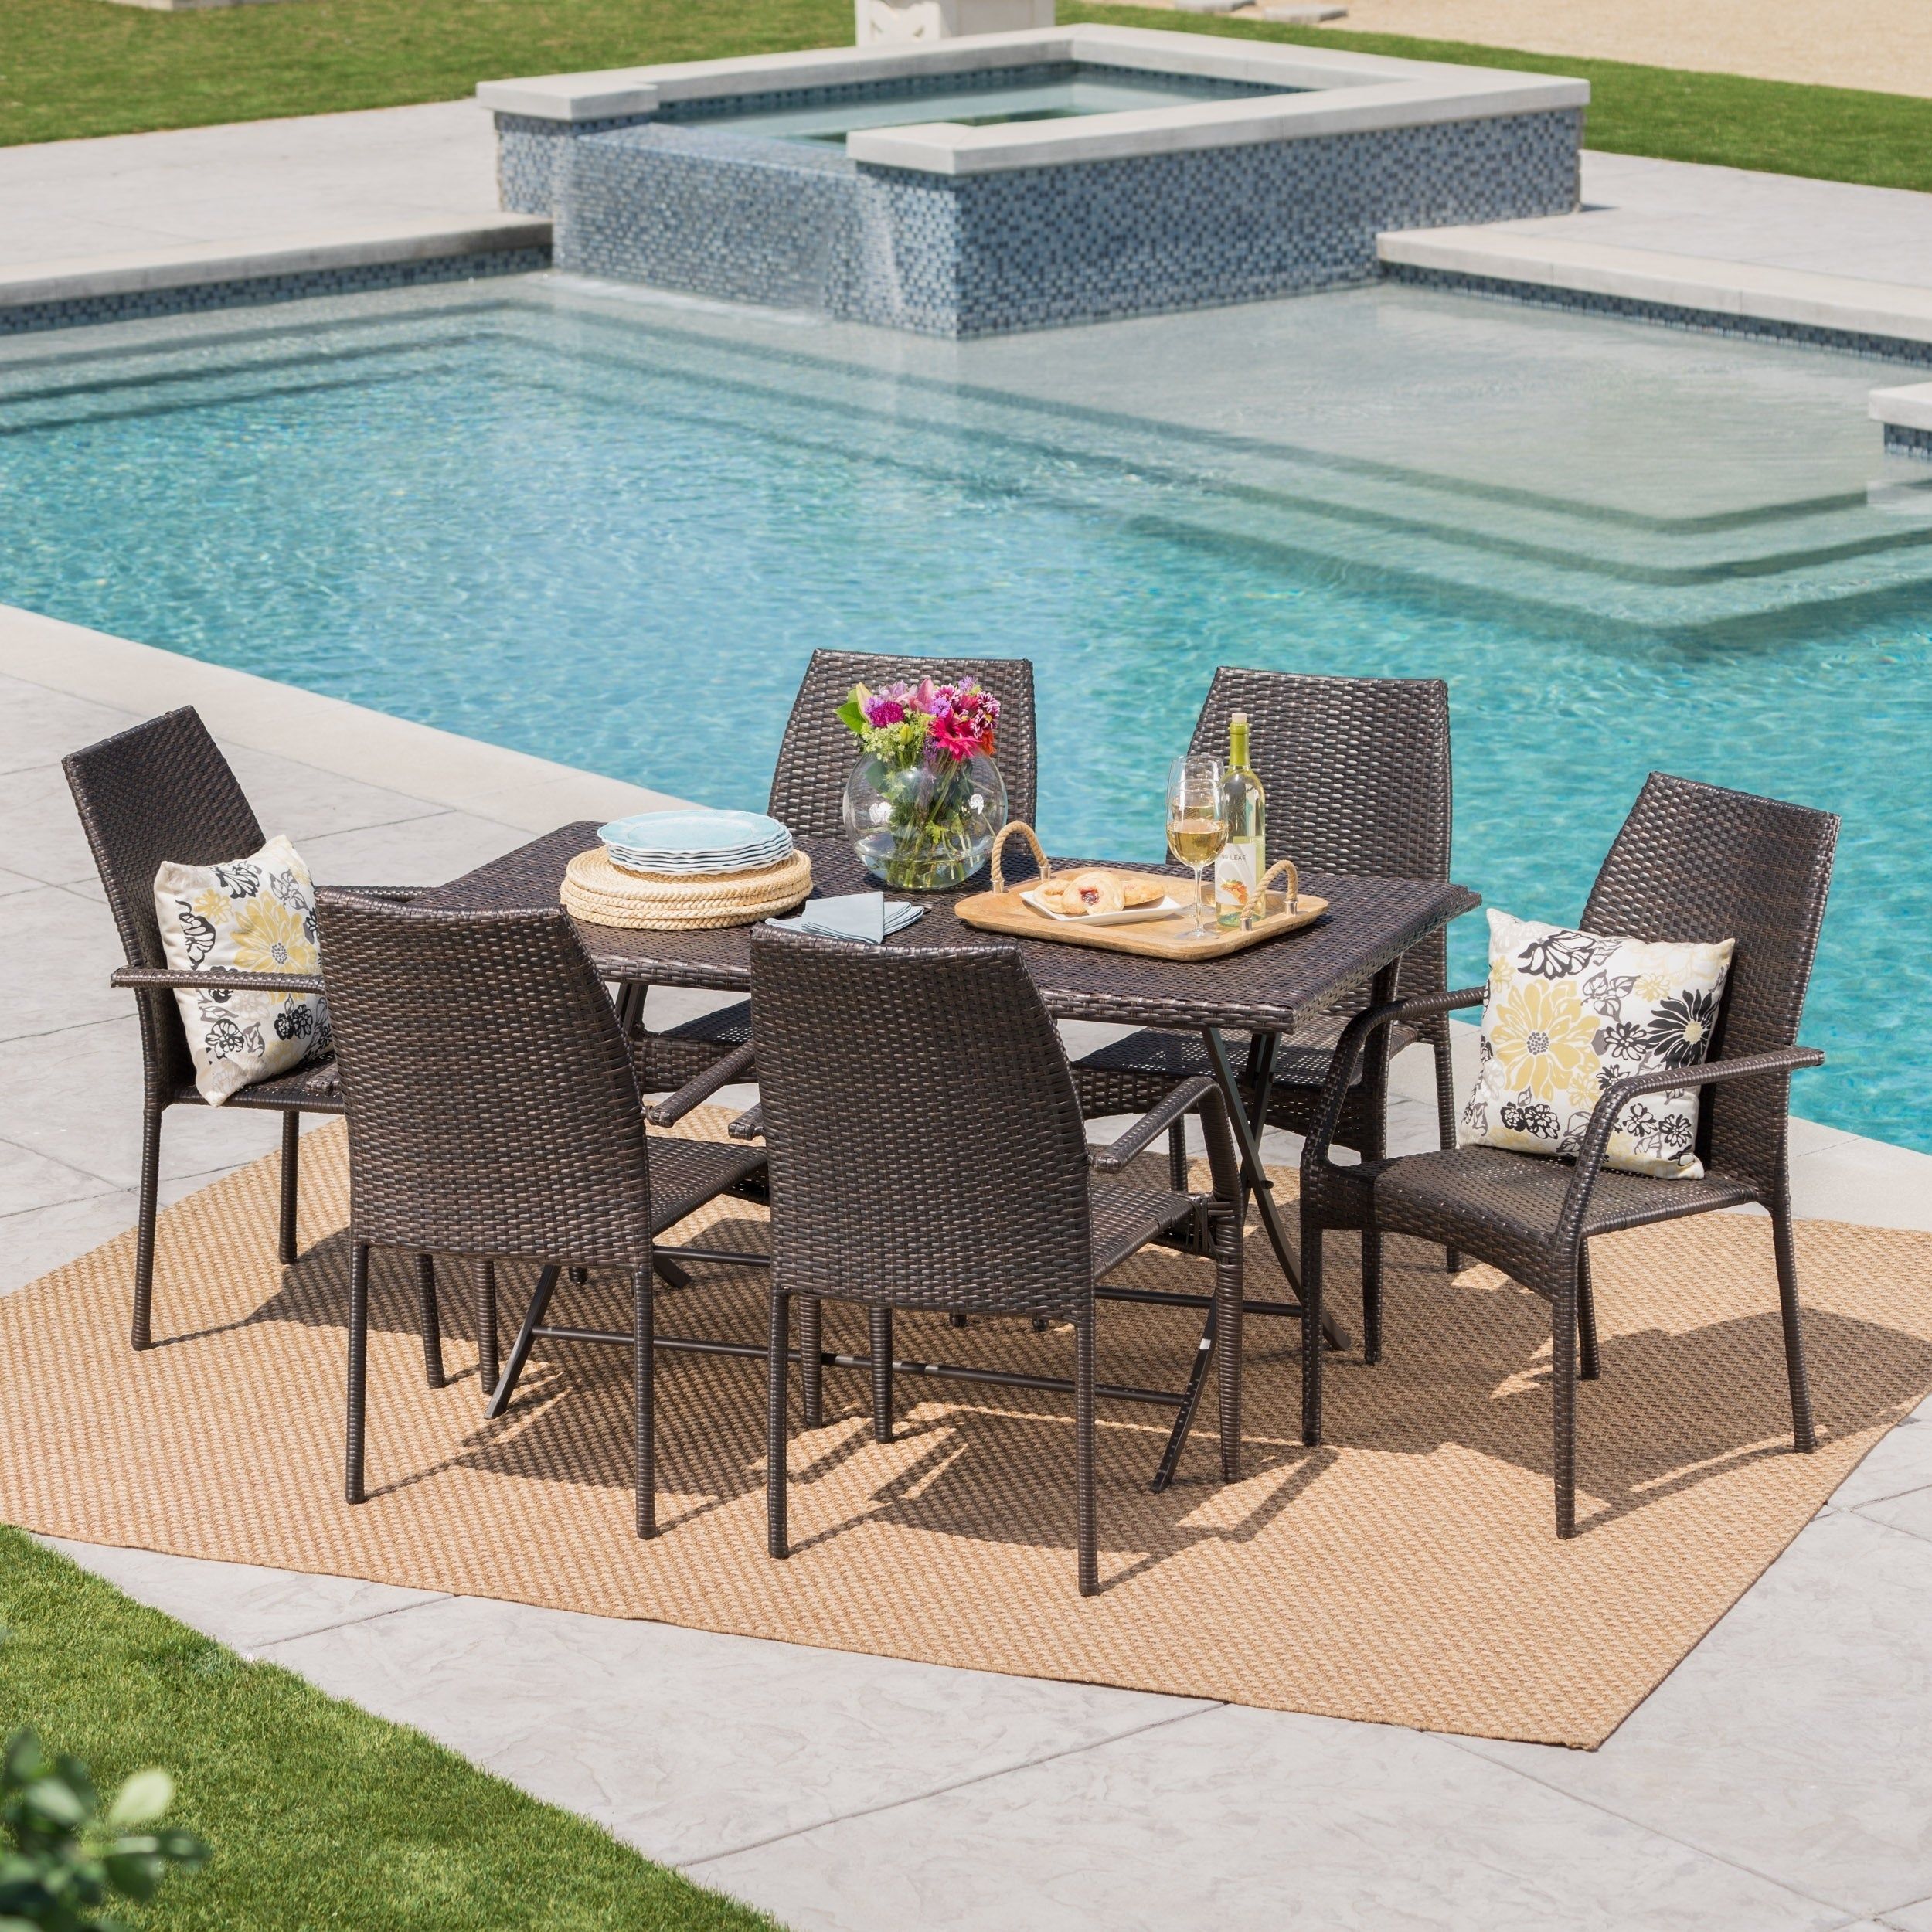 April Outdoor 7 Piece Rectangle Foldable Wicker Dining Set Brown N/A Inside Brown Wicker Rectangular Patio Dining Sets (View 1 of 15)